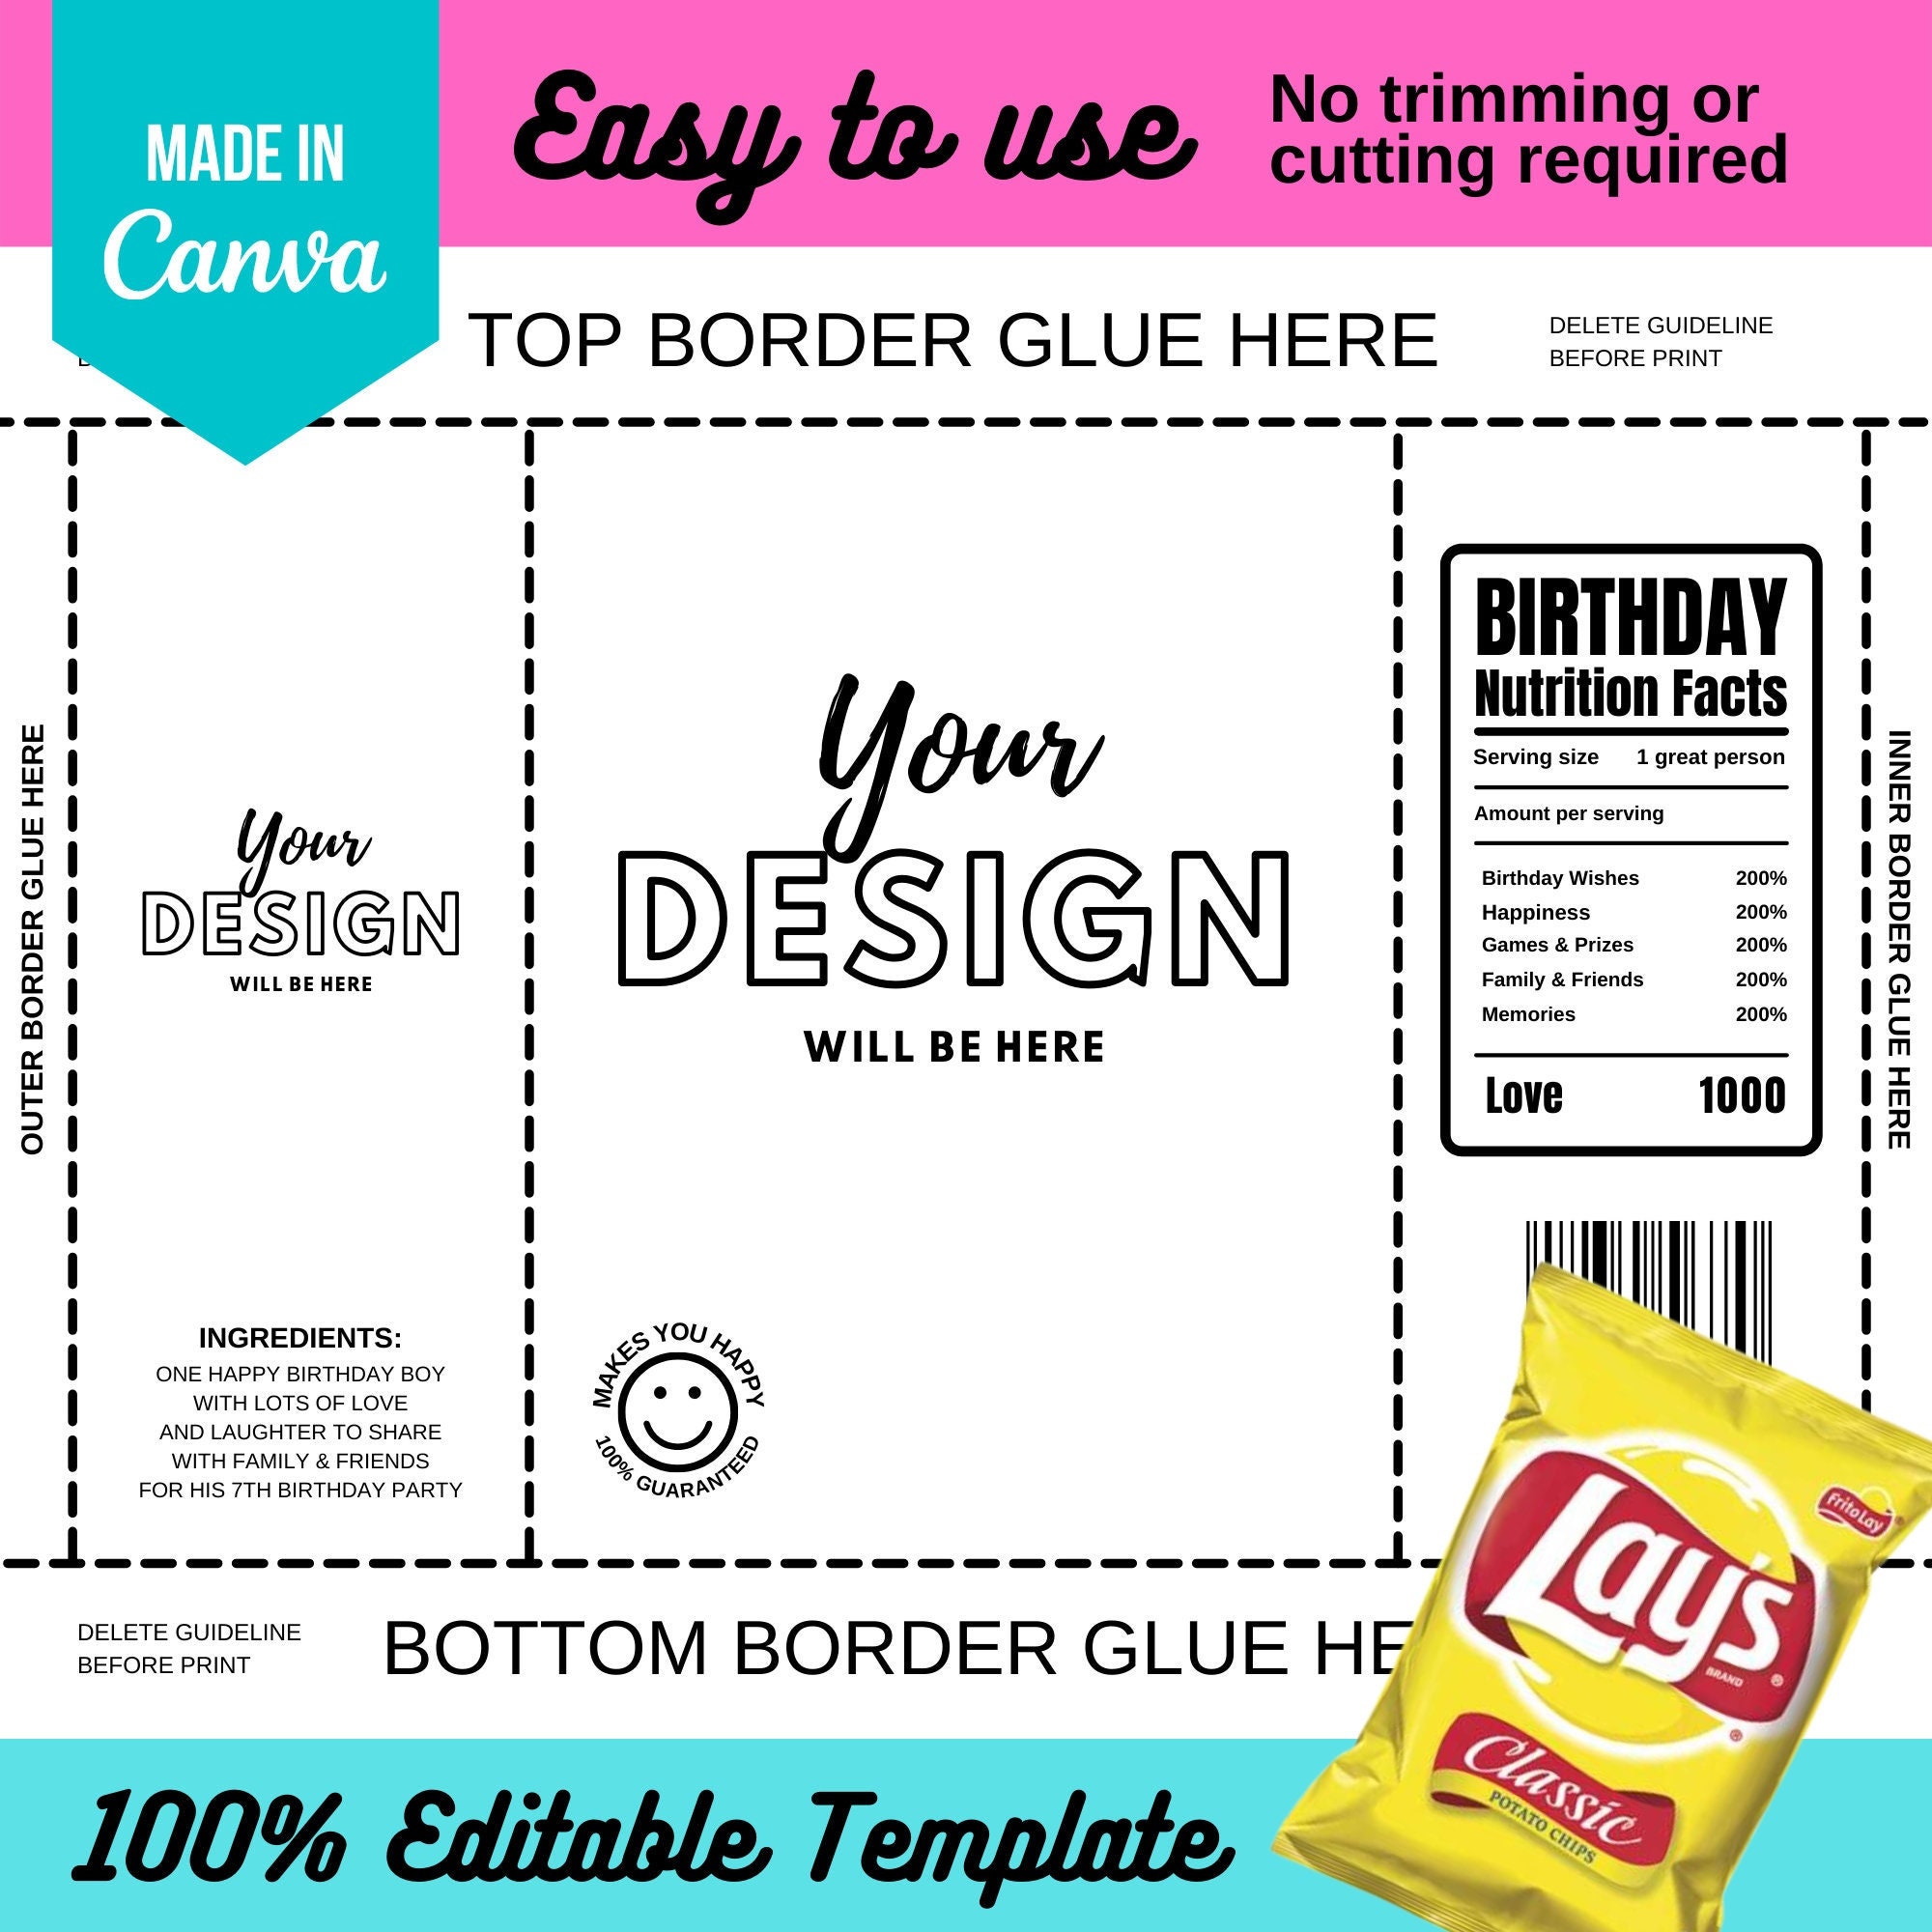 canva-chip-bag-template